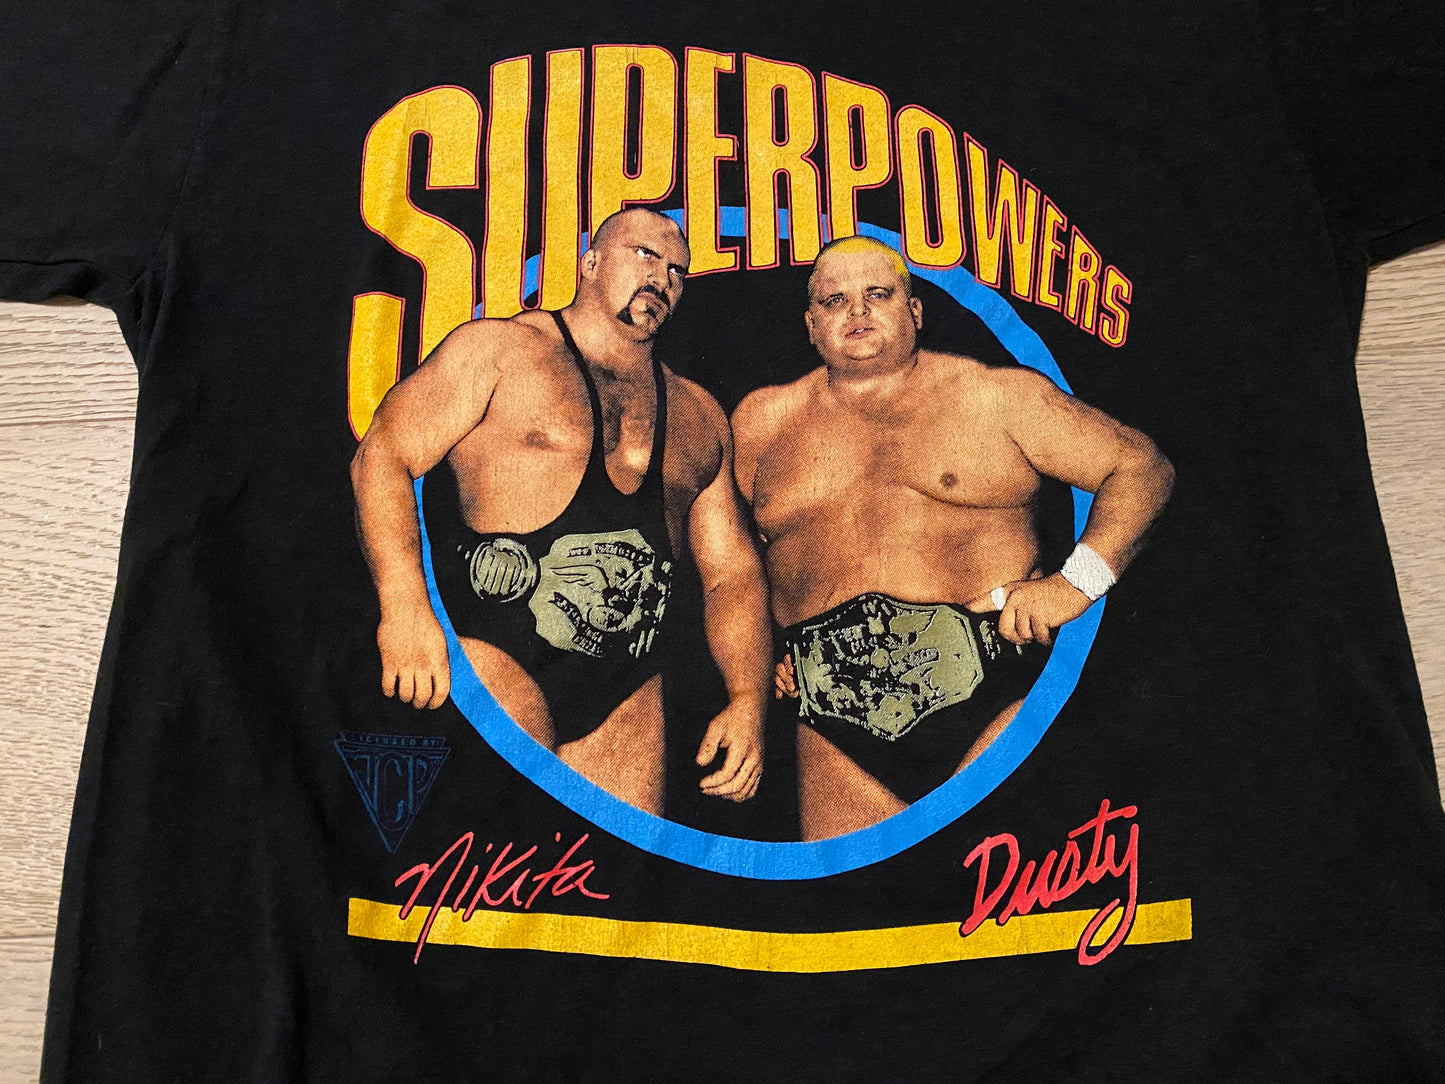 1987 NWA JCP Superpowers shirt featuring “The American Dream” Dusty Rhodes and Nikita Koloff